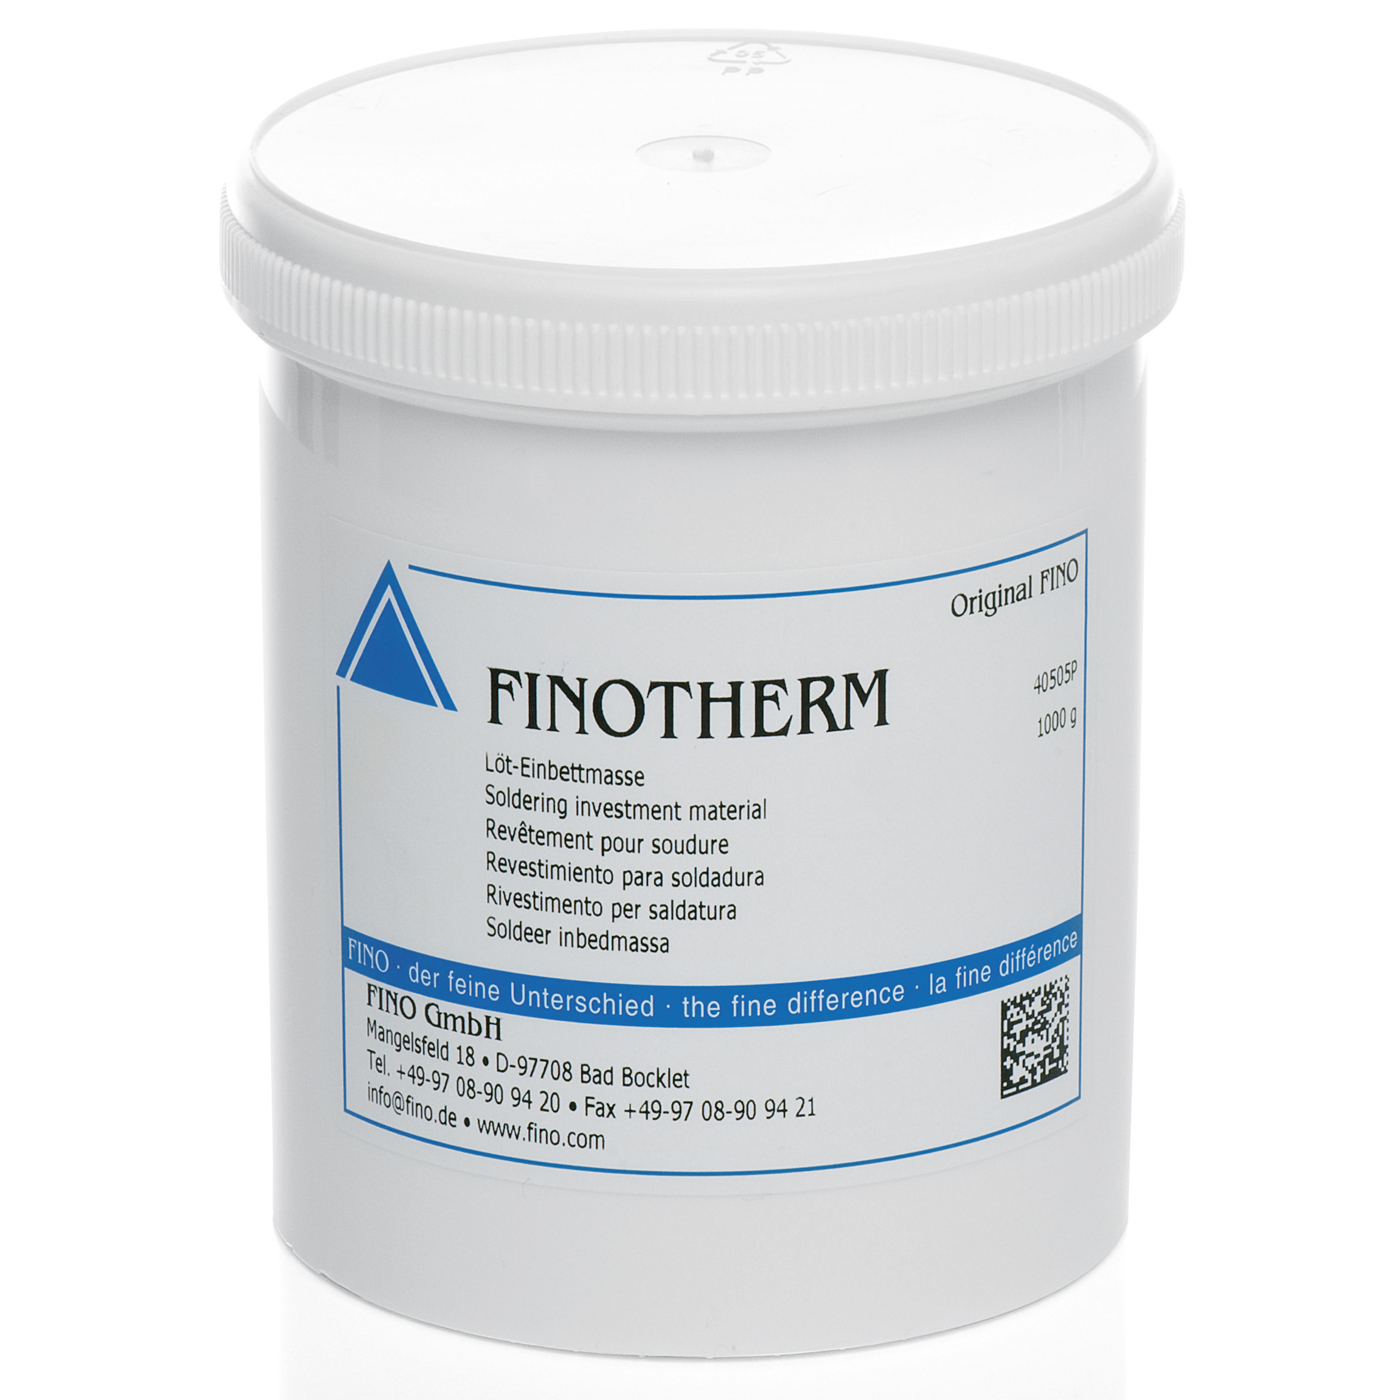 FINOTHERM Soldering Investment Material, Trial Pack - 1000 g